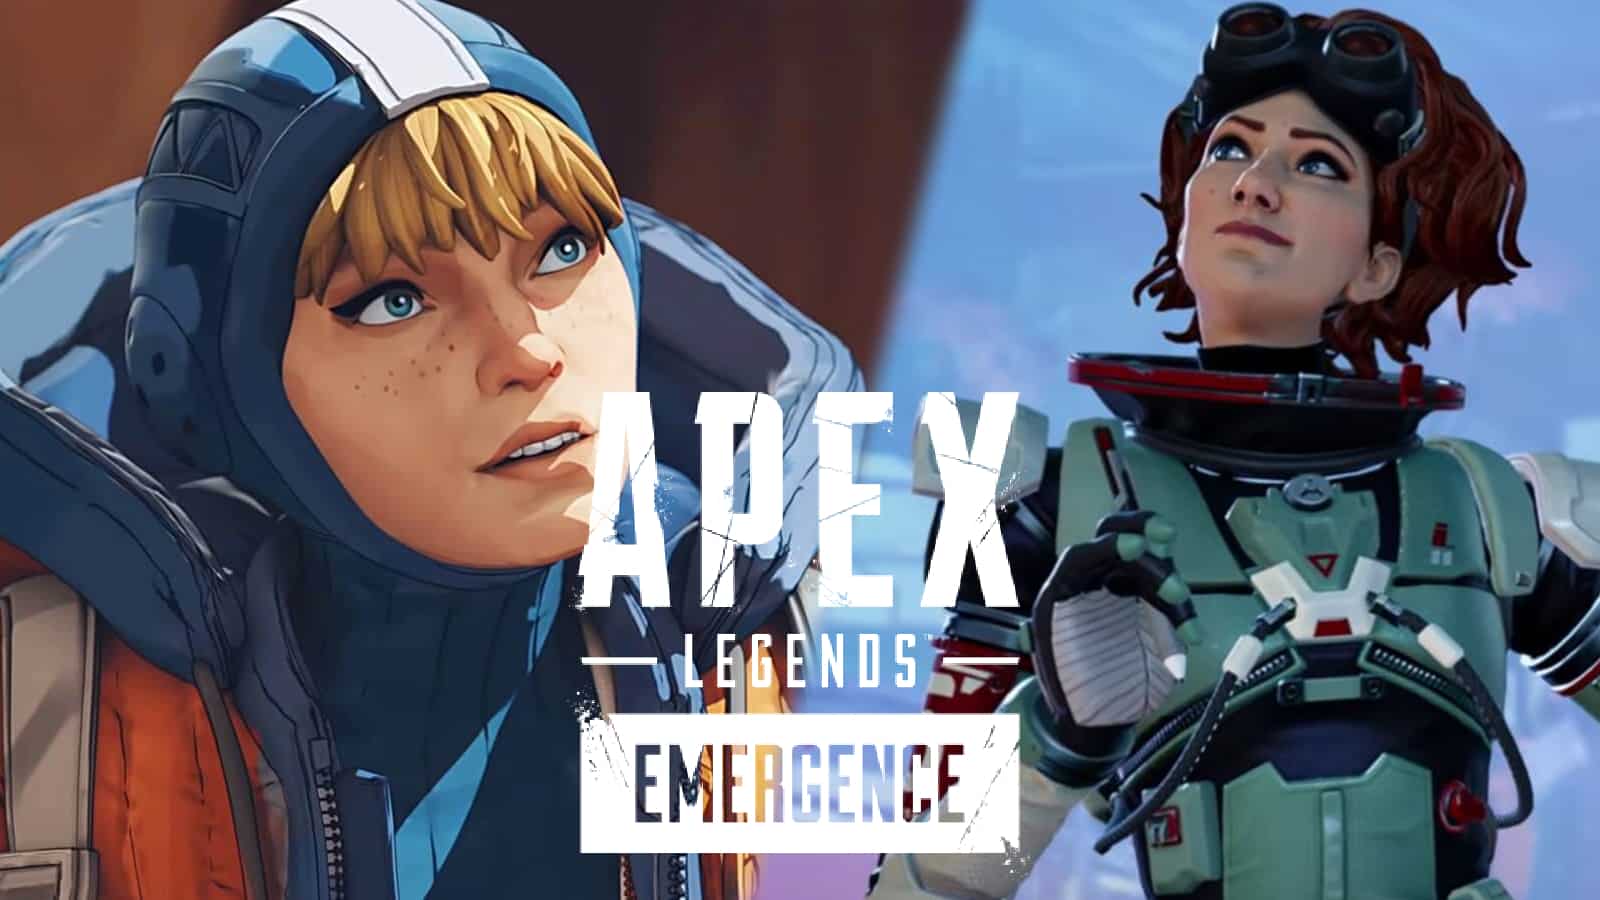 Big changes to small Legends with the Apex Legends Legacy update